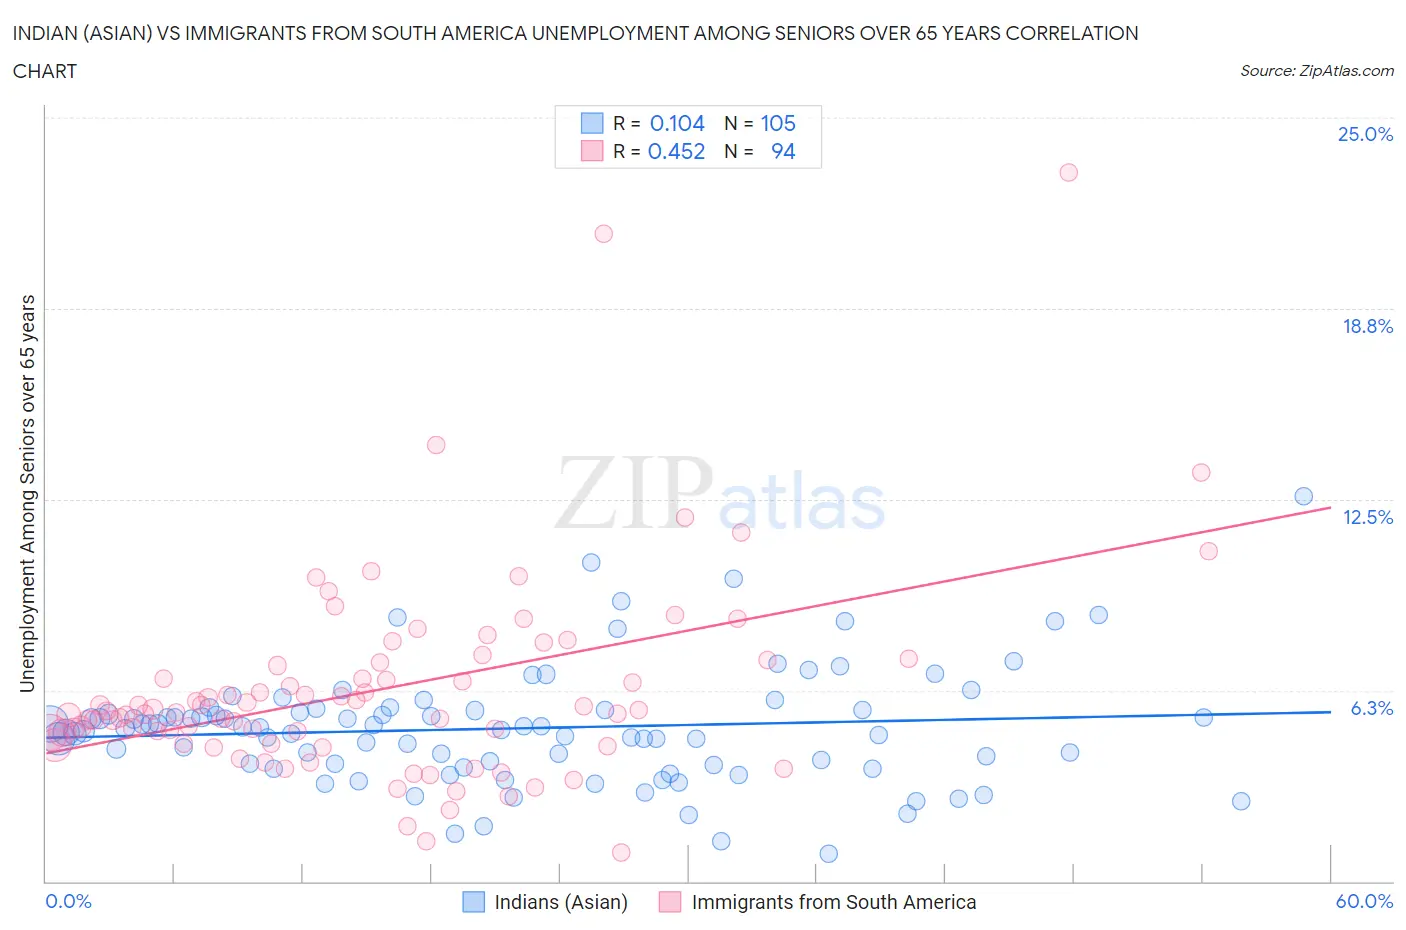 Indian (Asian) vs Immigrants from South America Unemployment Among Seniors over 65 years